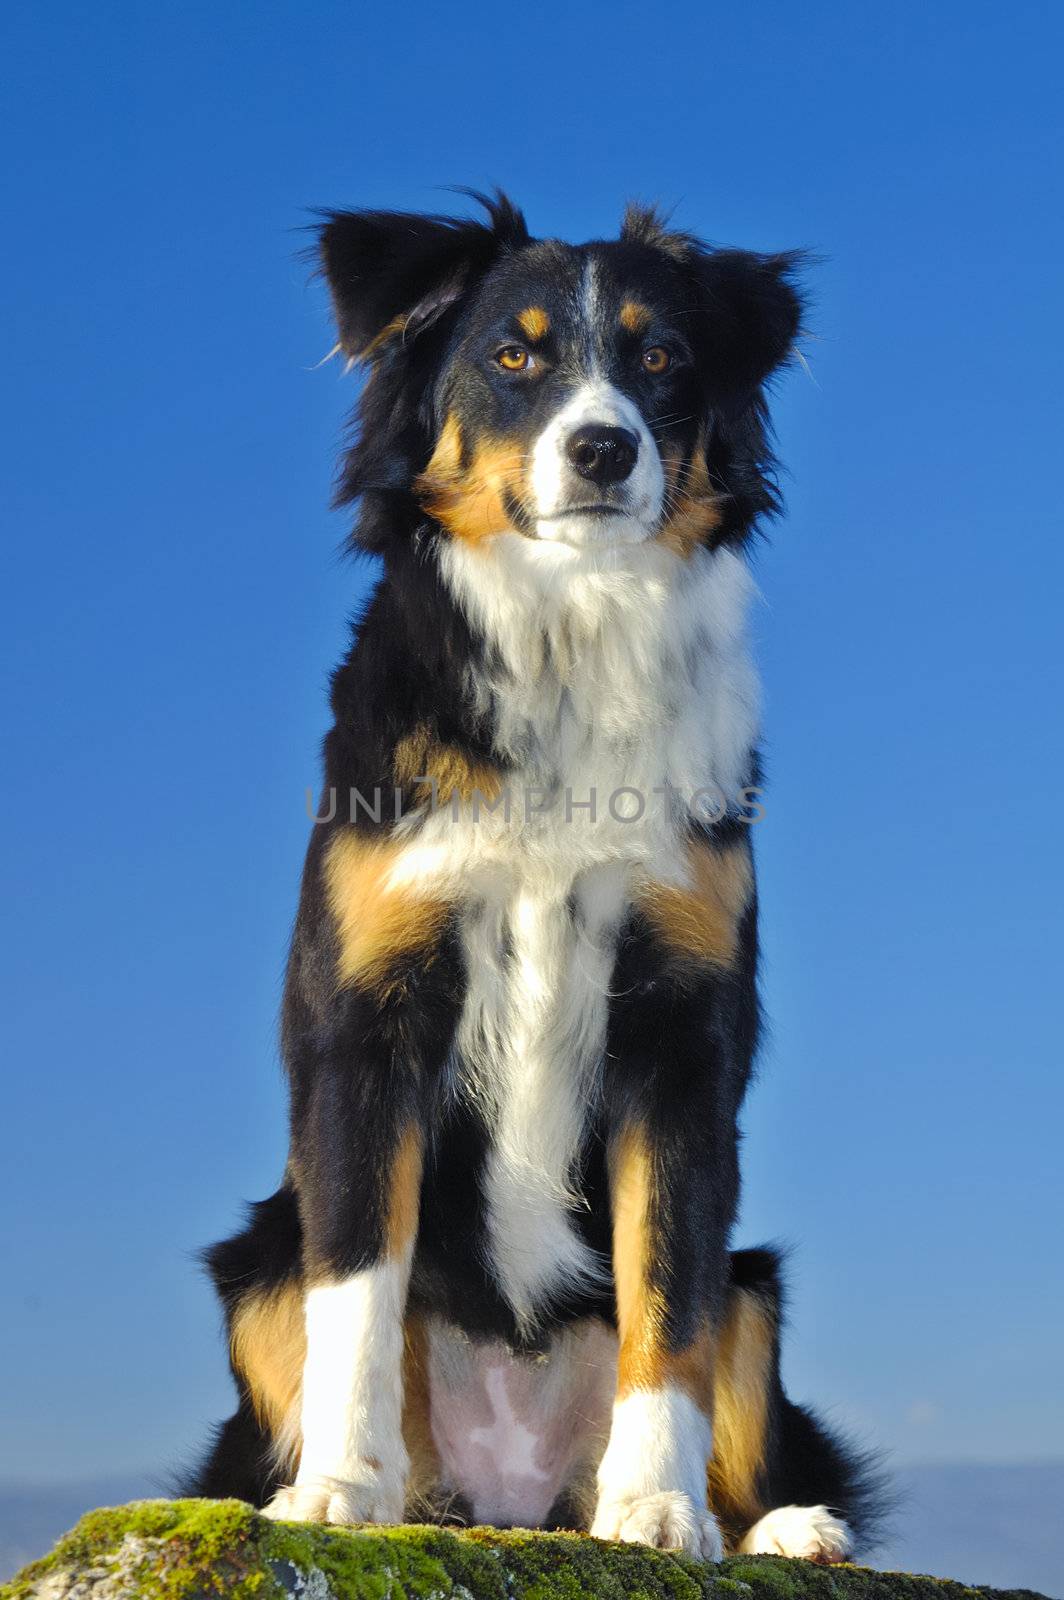 Young dog (cross between a Border Collie and a Swiss breed called Appenzeller), sitting with a watchful look. Taken from a low viewpoint, against a blue sky.